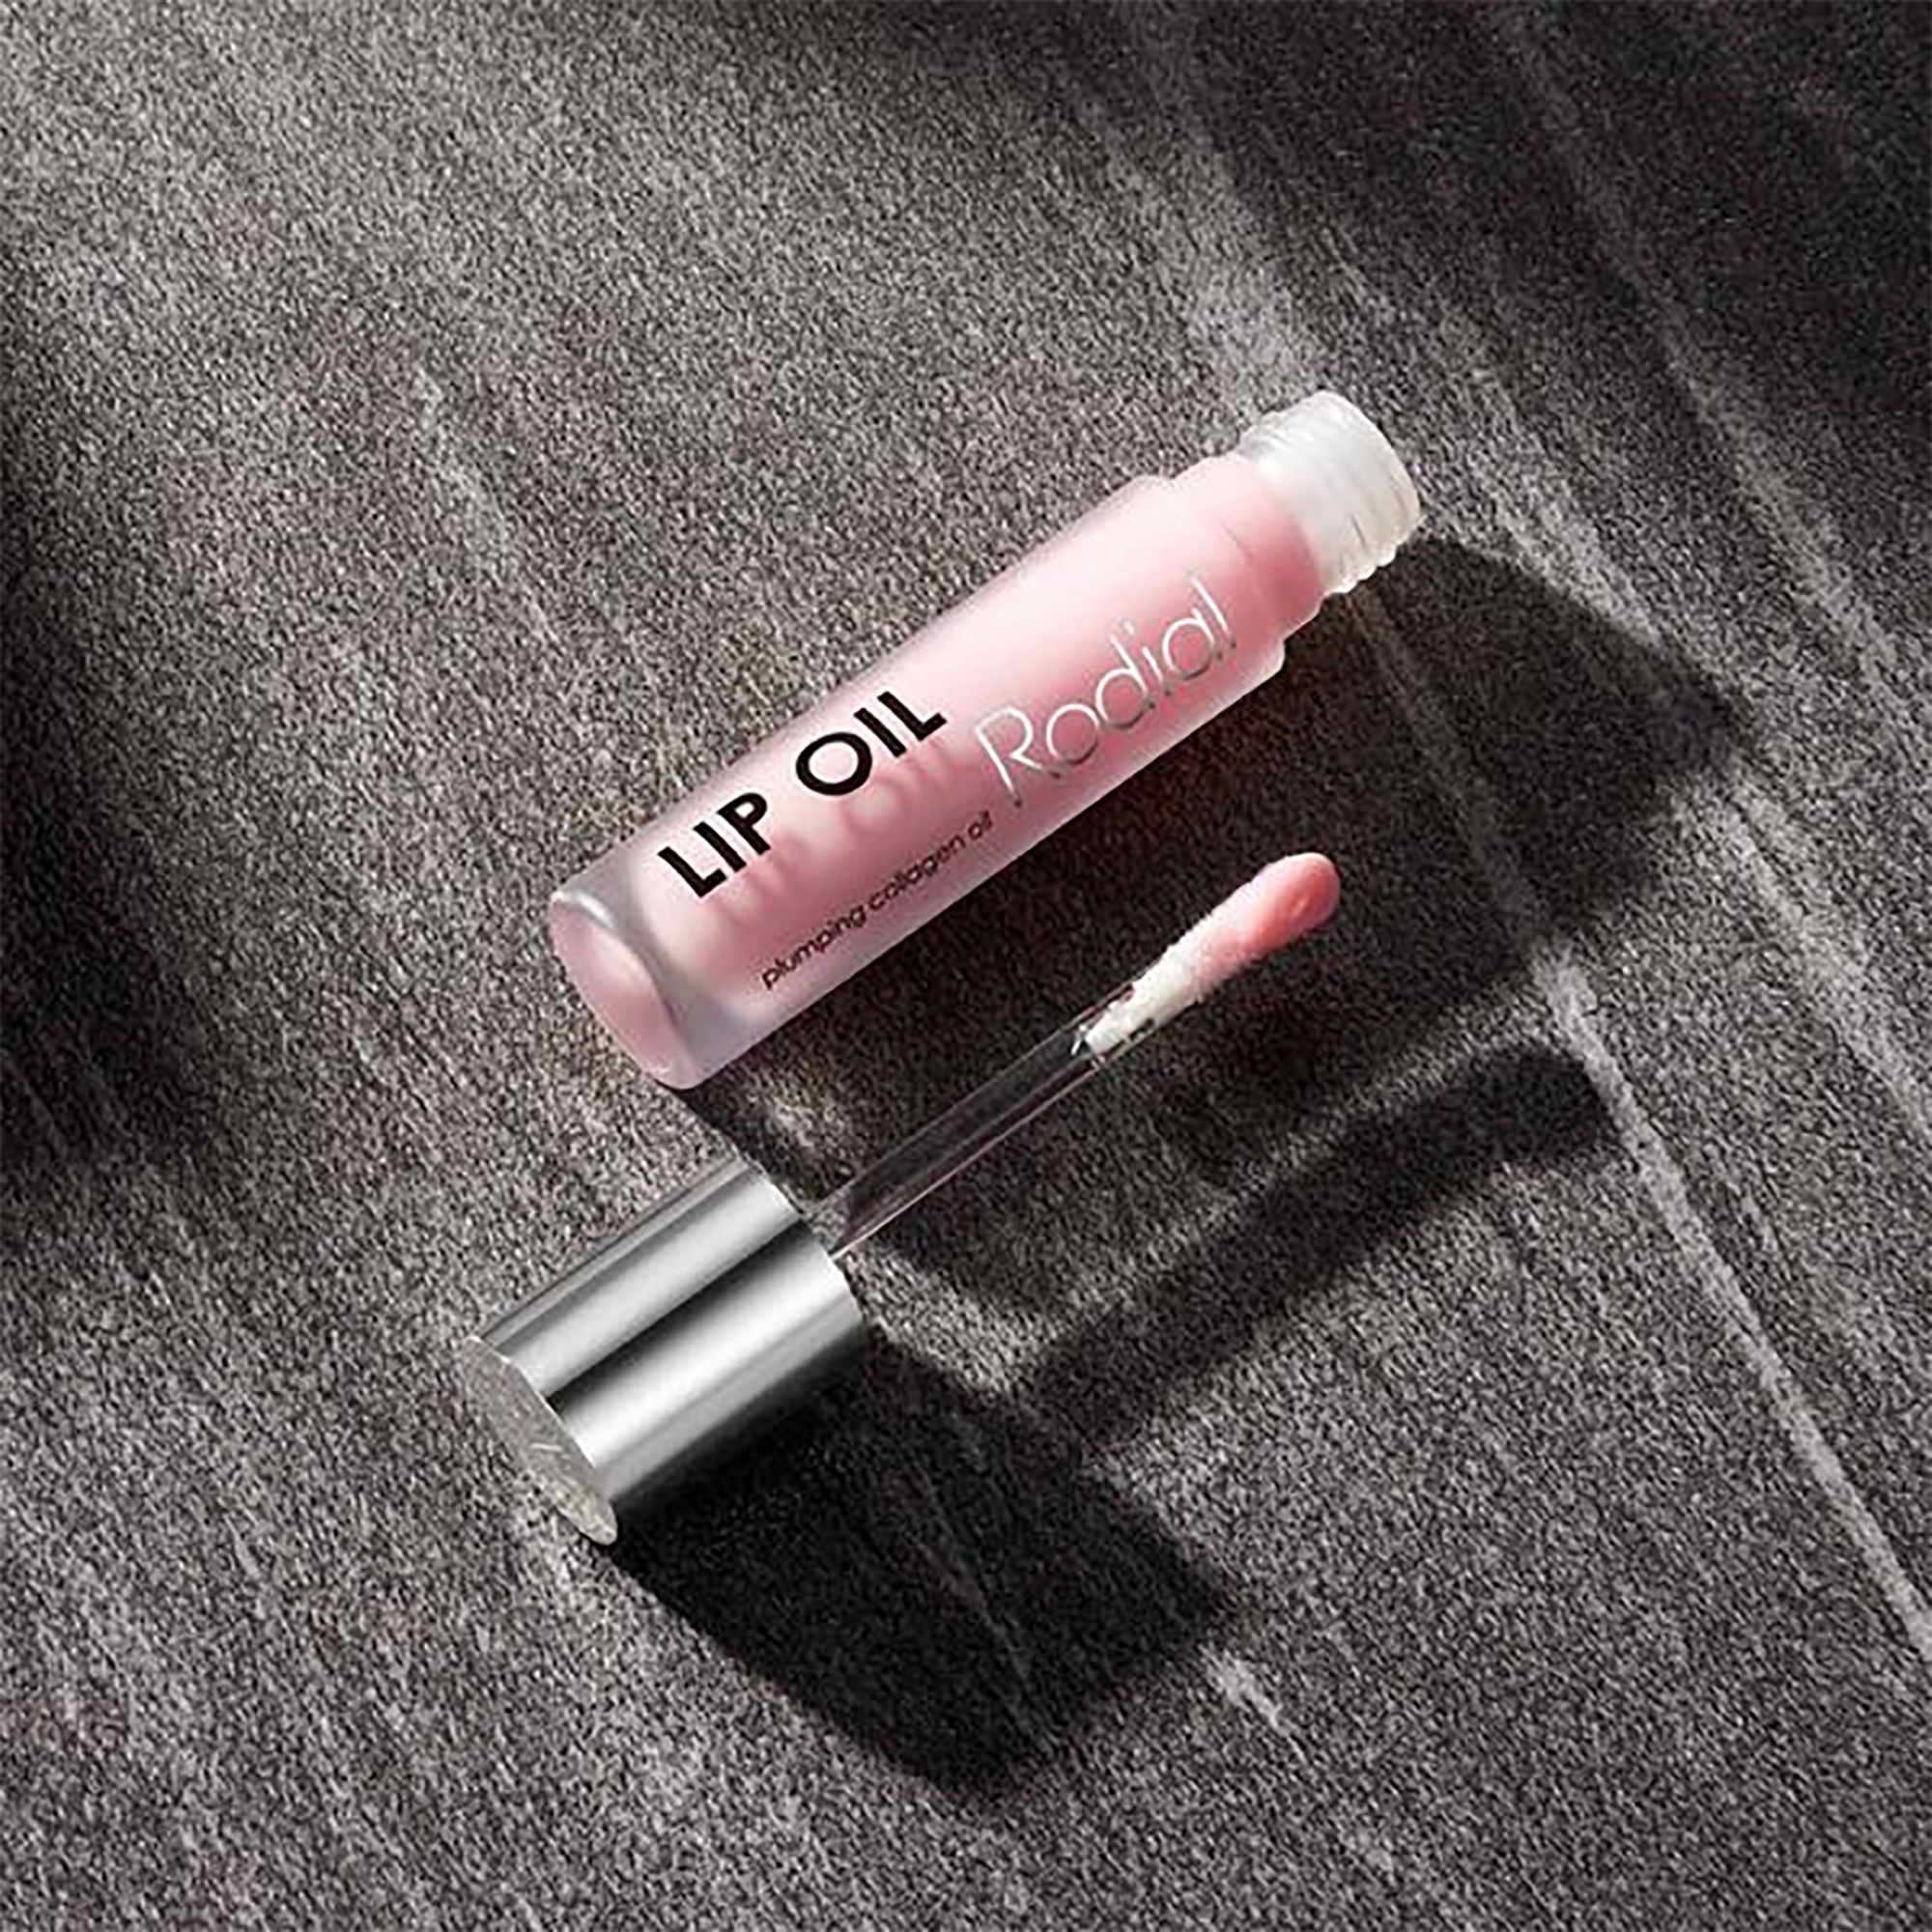 Rodial Plumping Collagen Lip Oil / PINK